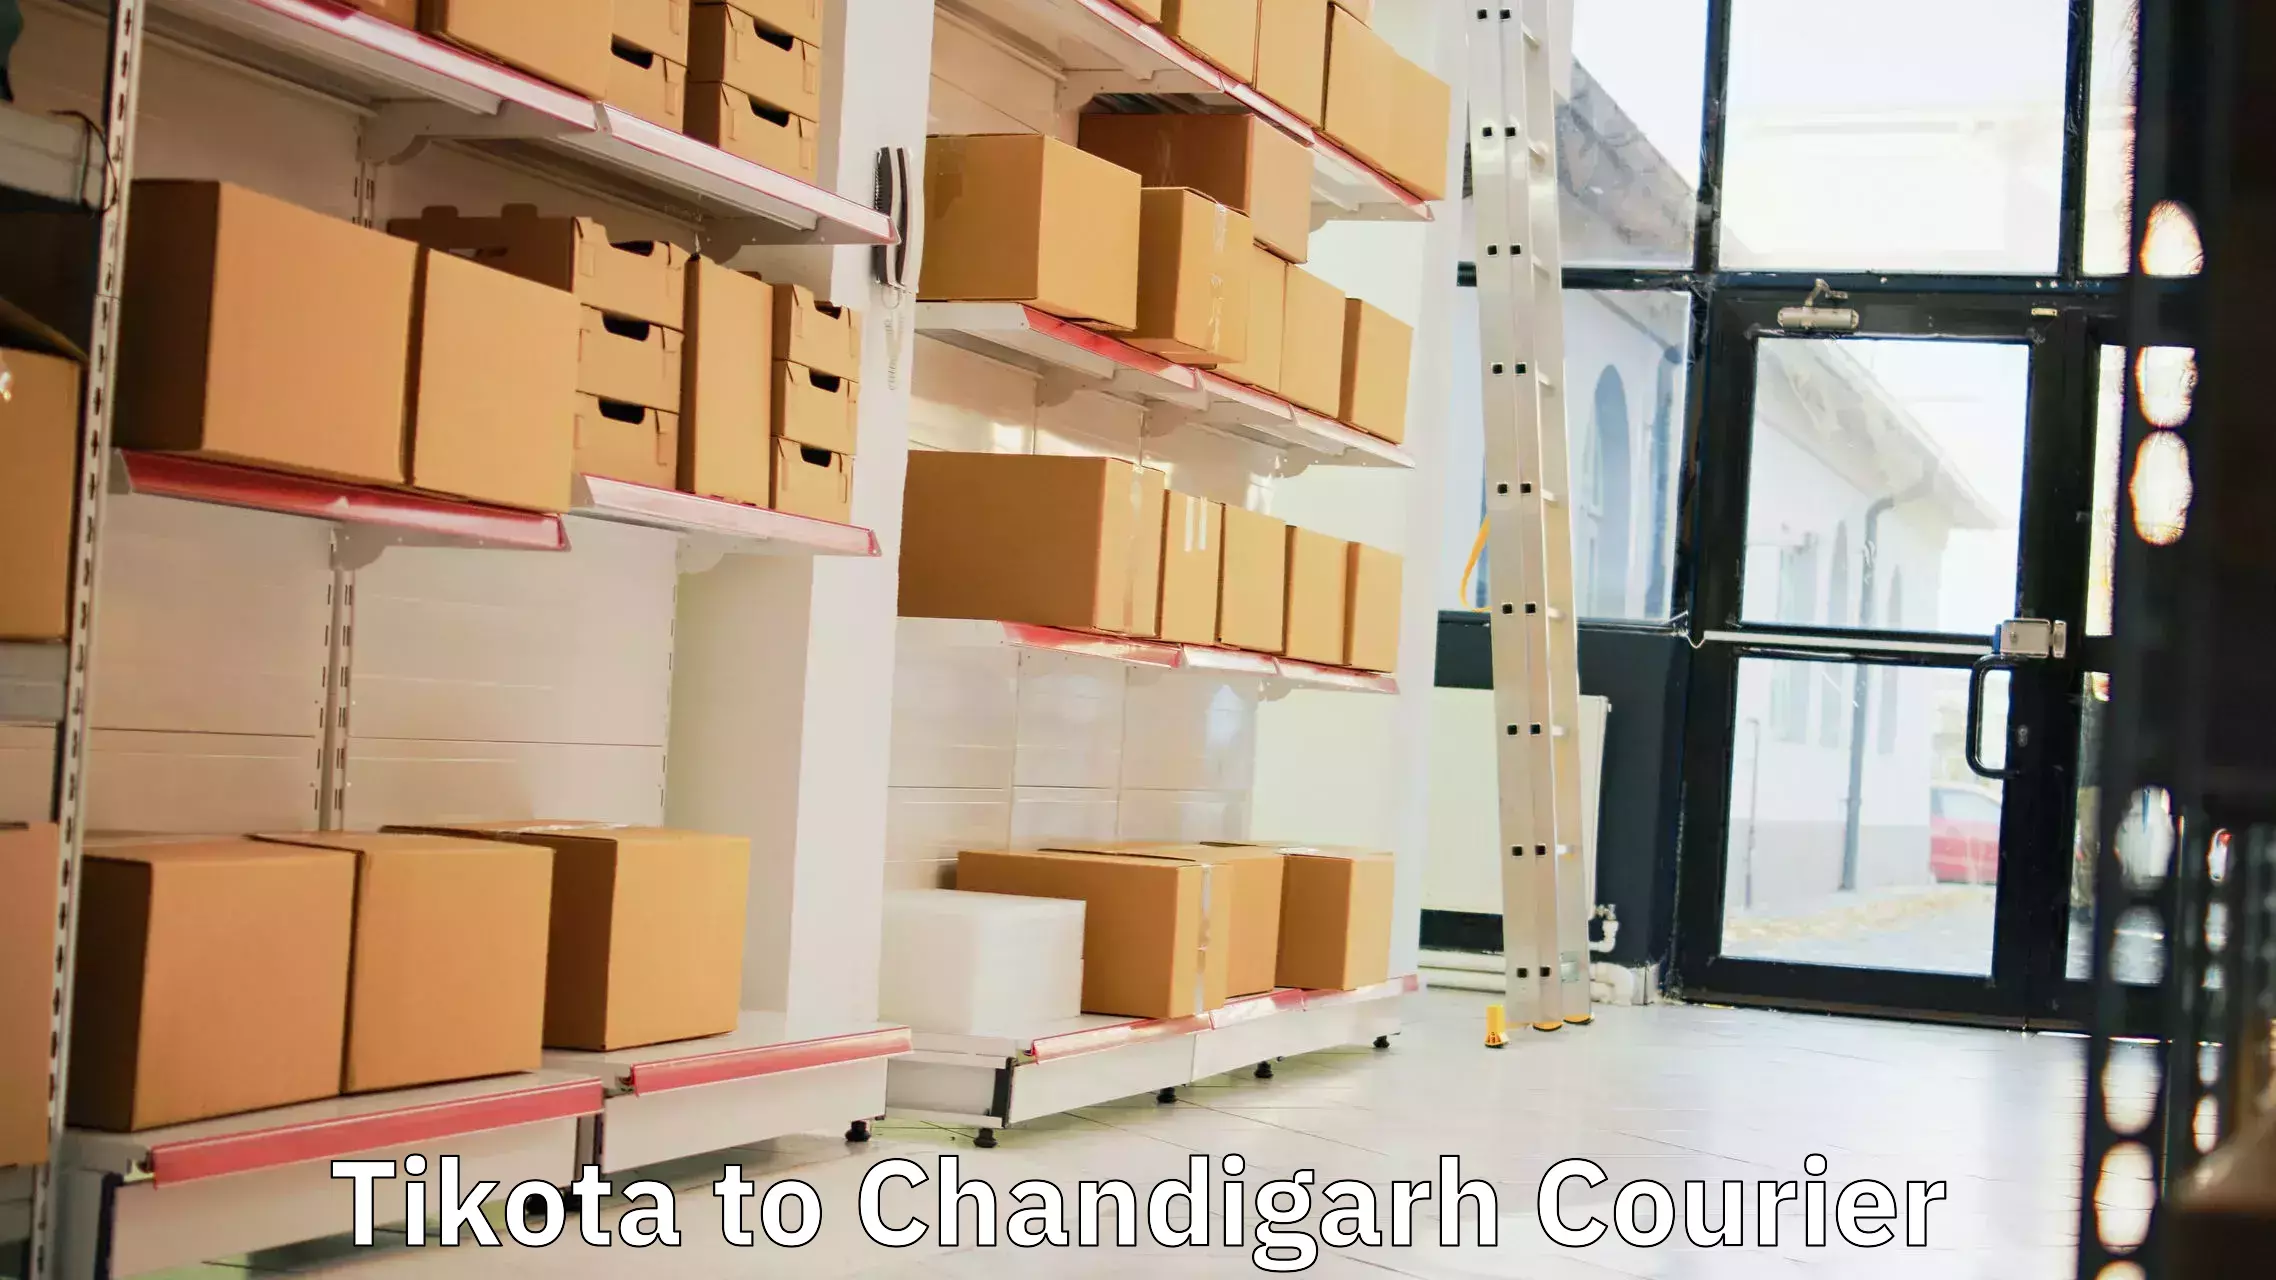 Express package services Tikota to Chandigarh